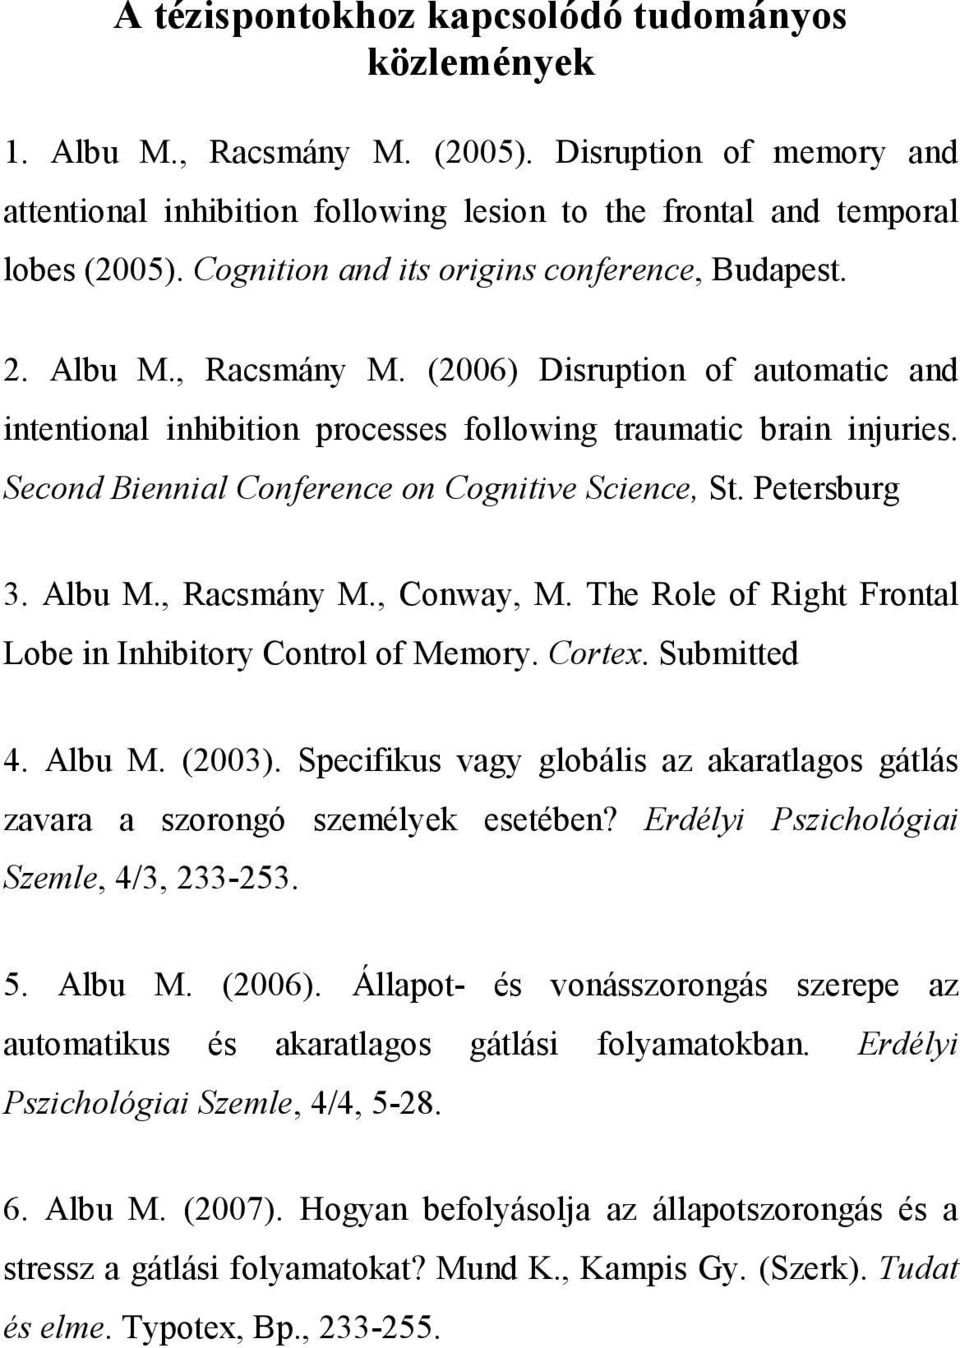 Second Biennial Conference on Cognitive Science, St. Petersburg 3. Albu M., Racsmány M., Conway, M. The Role of Right Frontal Lobe in Inhibitory Control of Memory. Cortex. Submitted 4. Albu M. (2003).